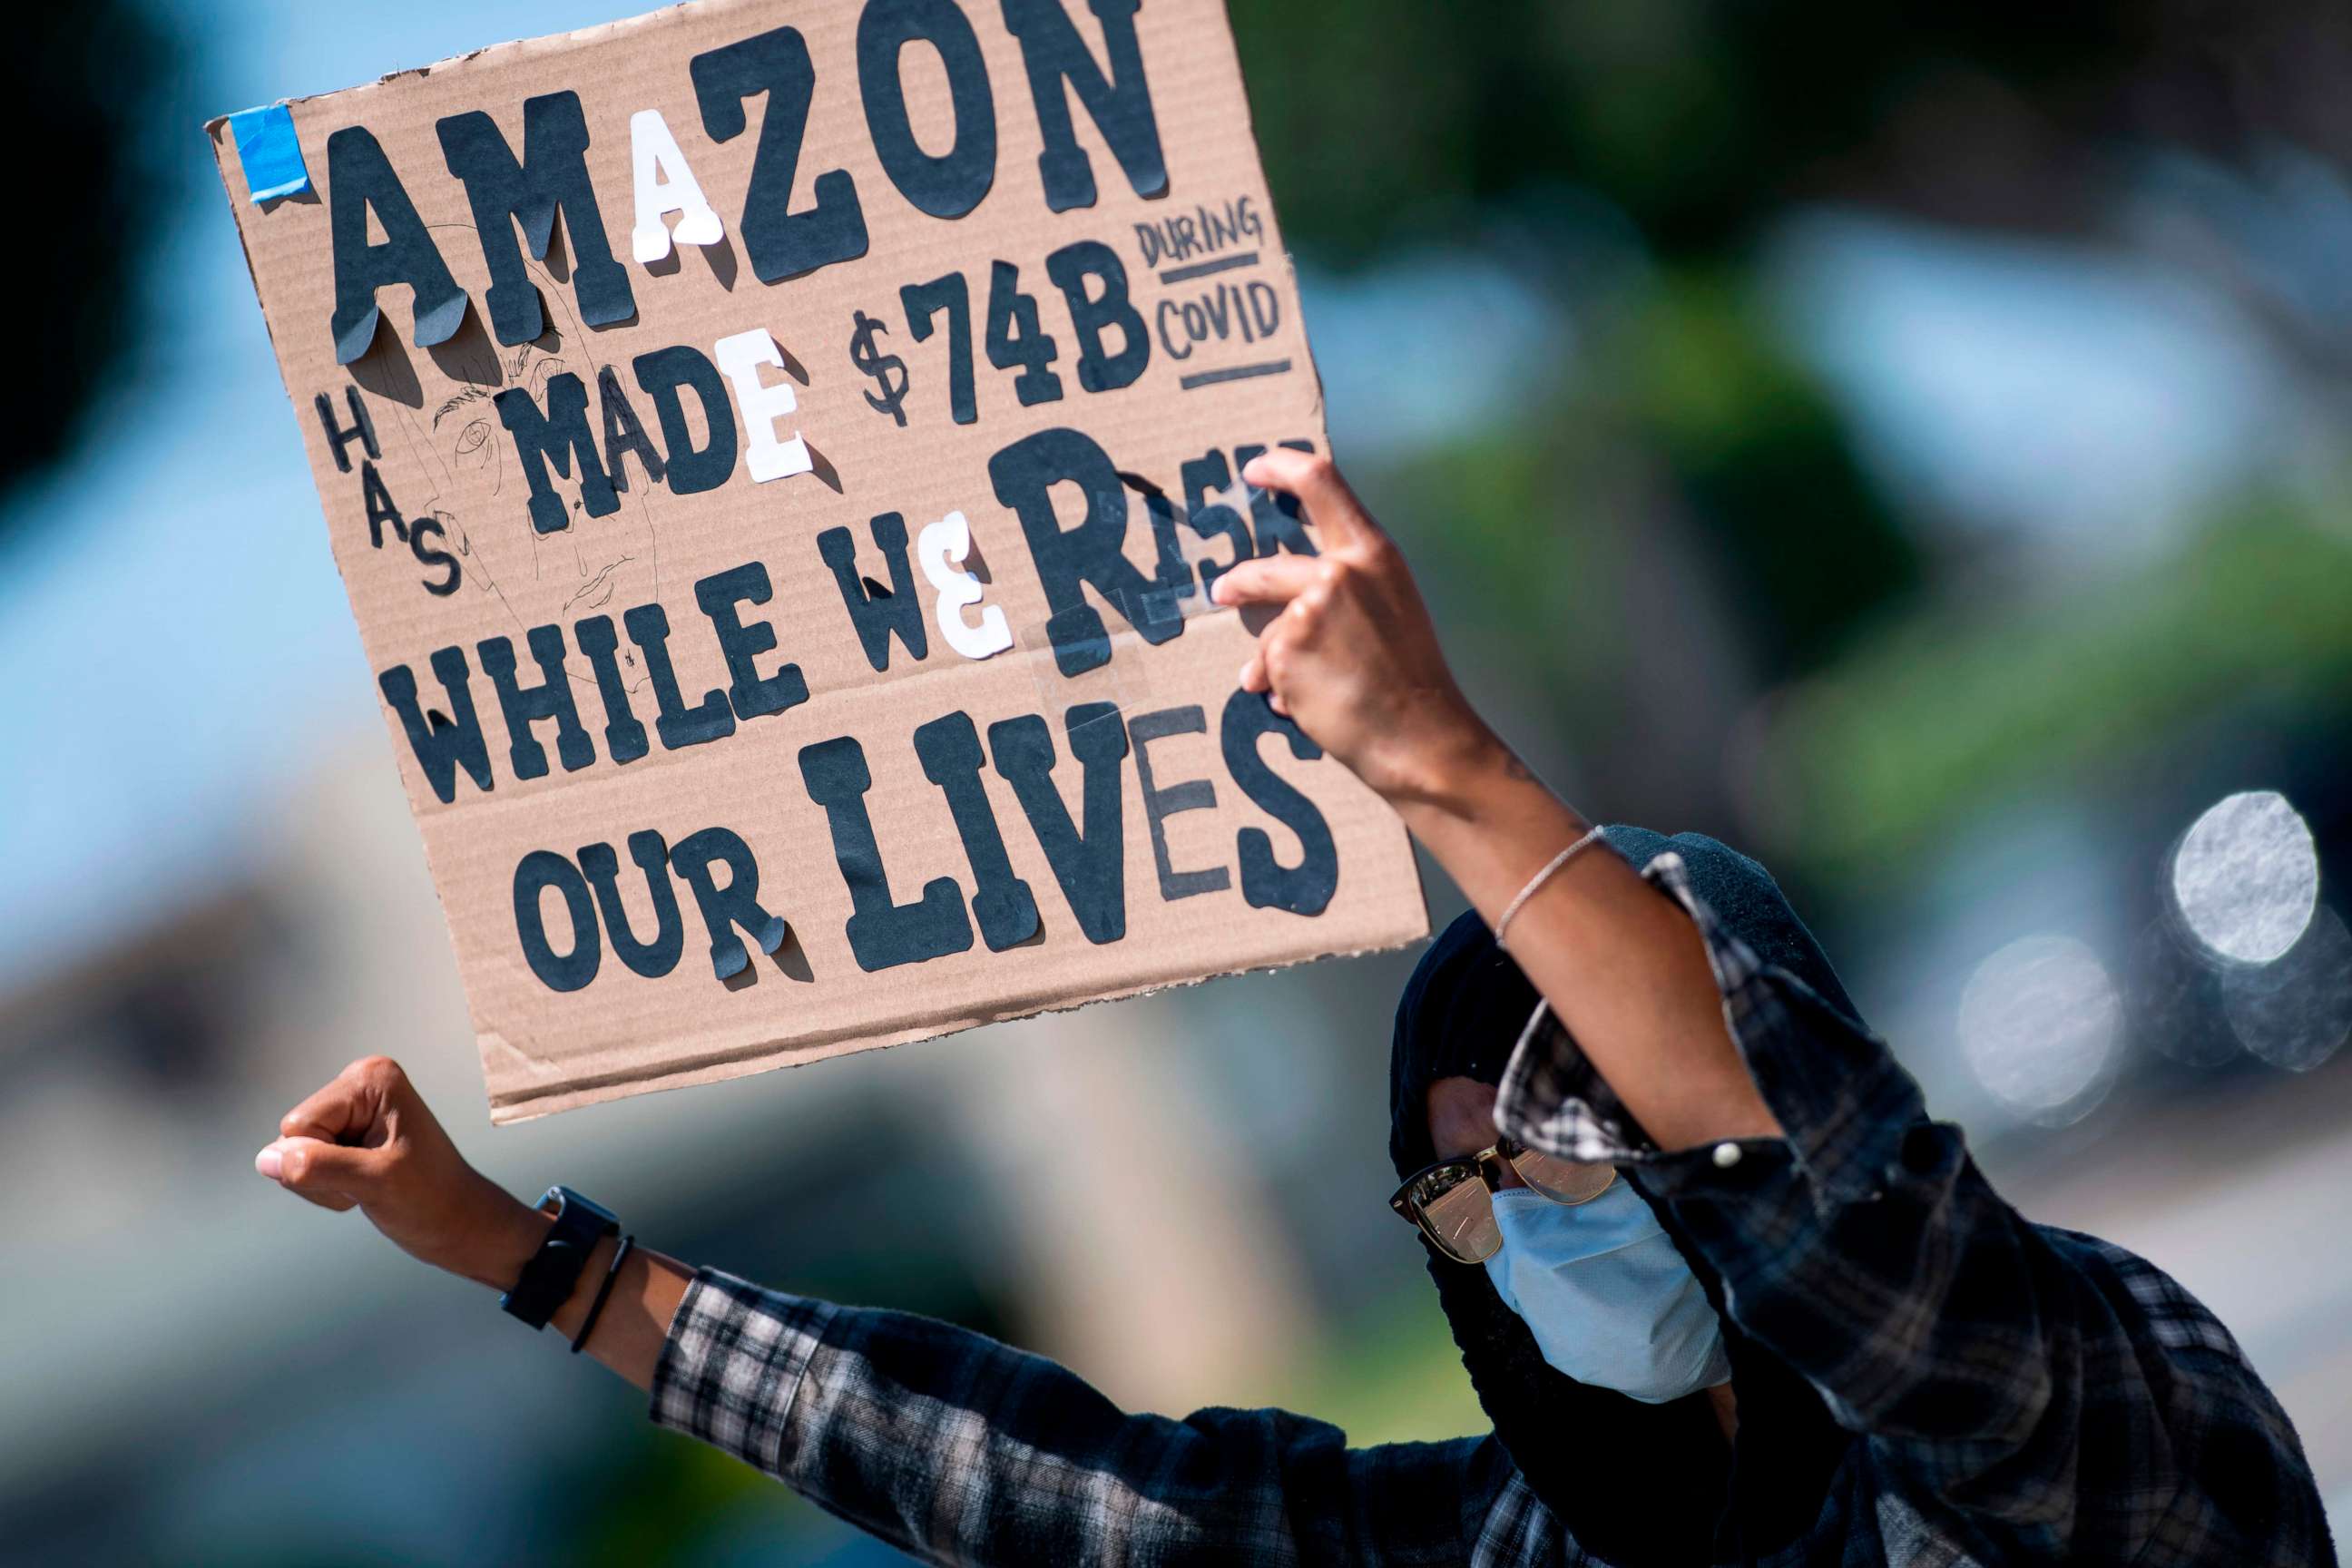 PHOTO: Workers protest against the failure from their employers to provide adequate protections in the workplace of the Amazon delivery hub on National May Day Walkout/Sickout in Hawthorne, Calif., May 1, 2020.